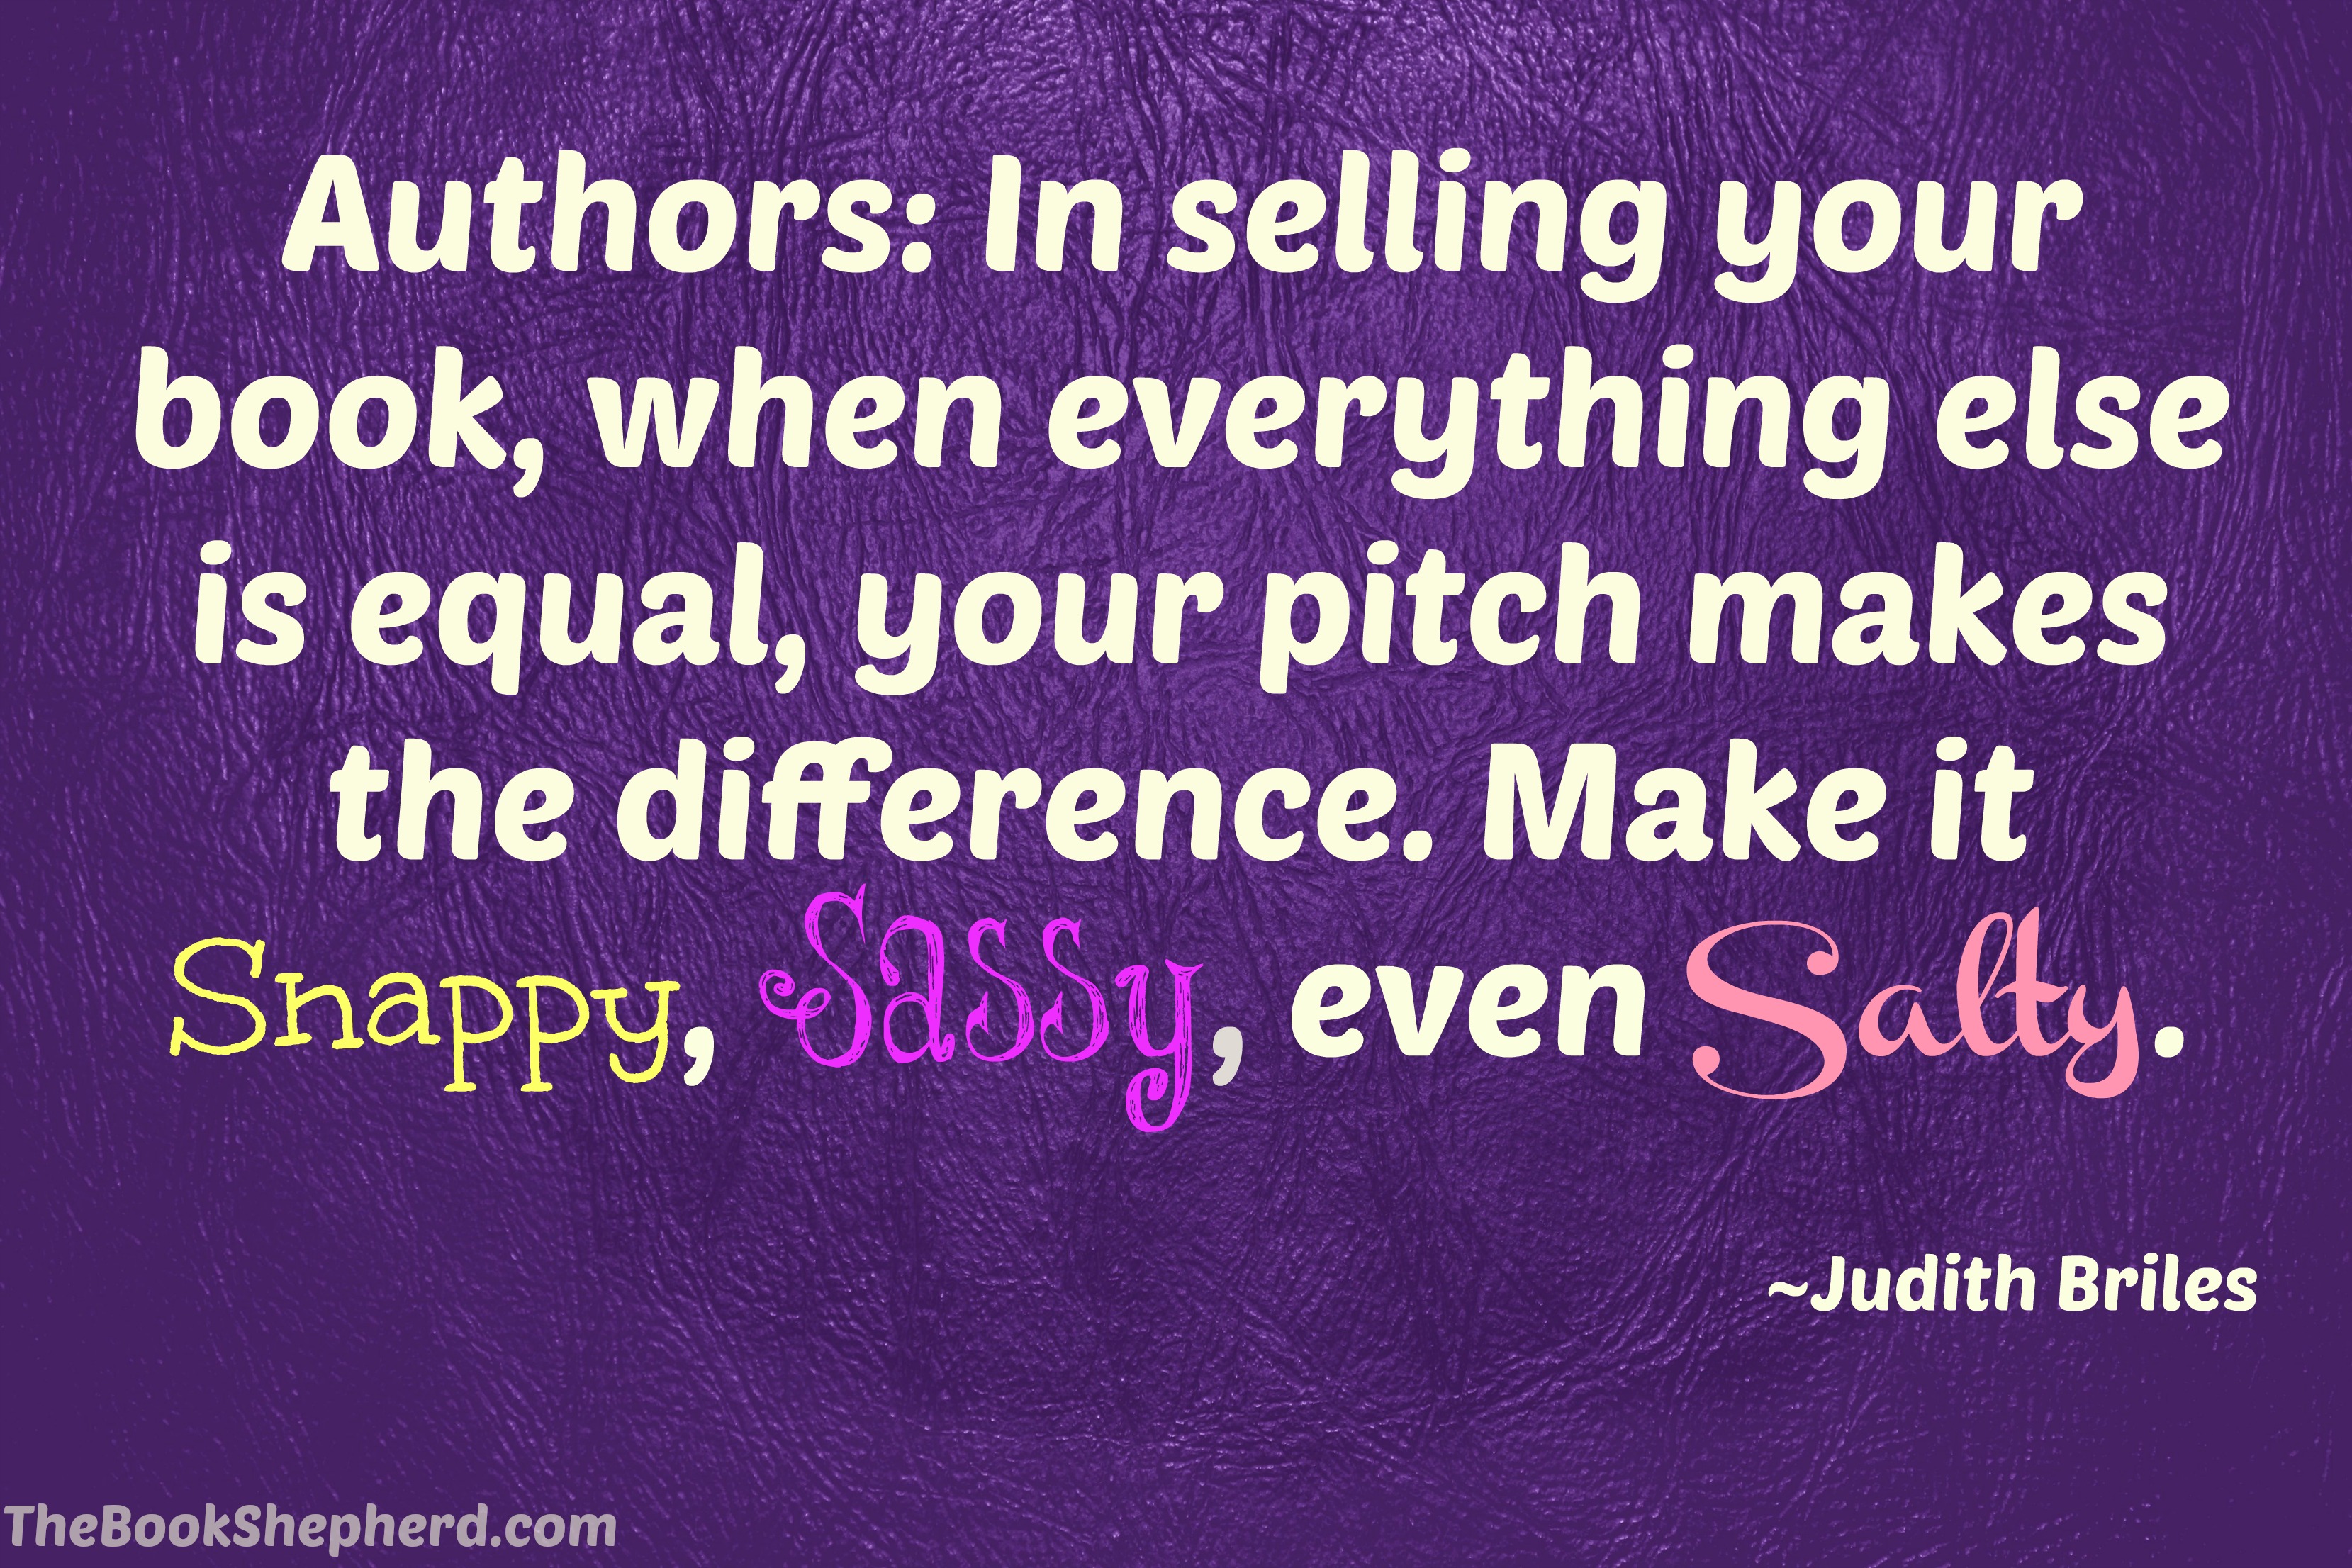 In selling your book